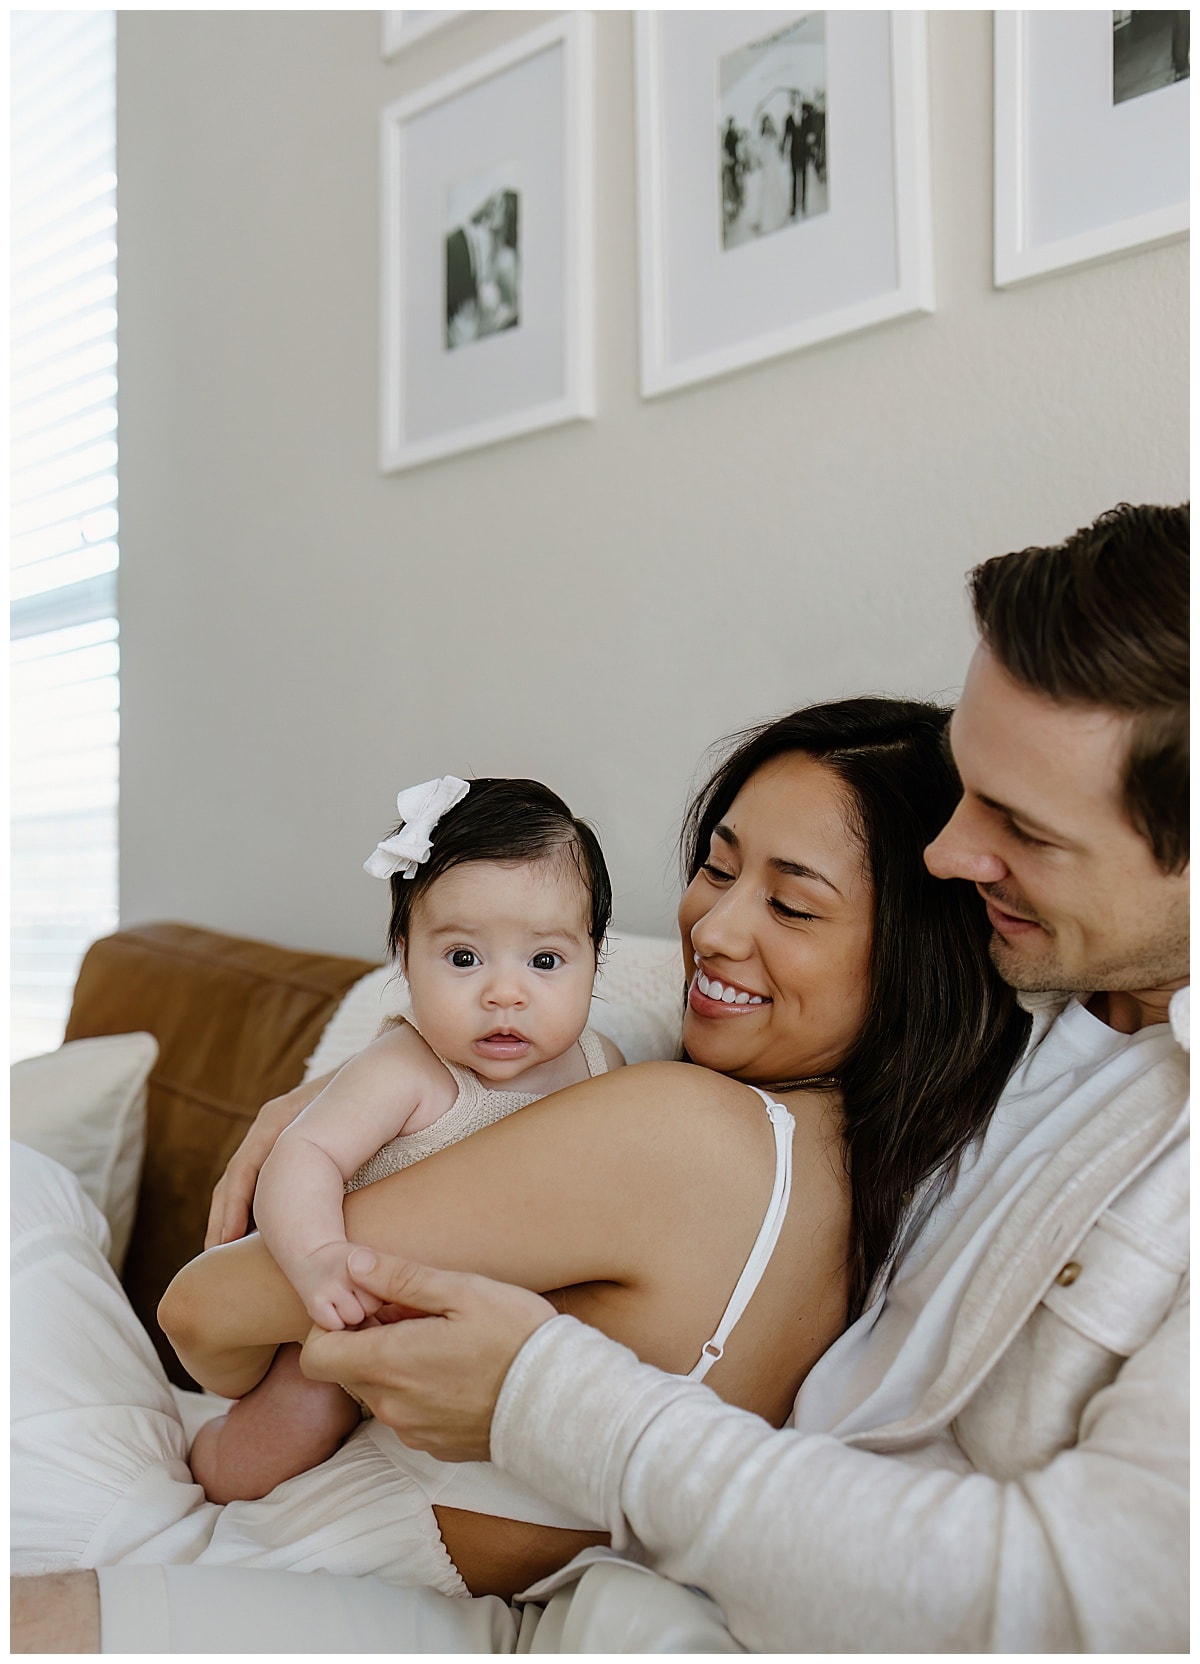 Parents smile at their baby understanding the importance of being able to Document Your Newborn